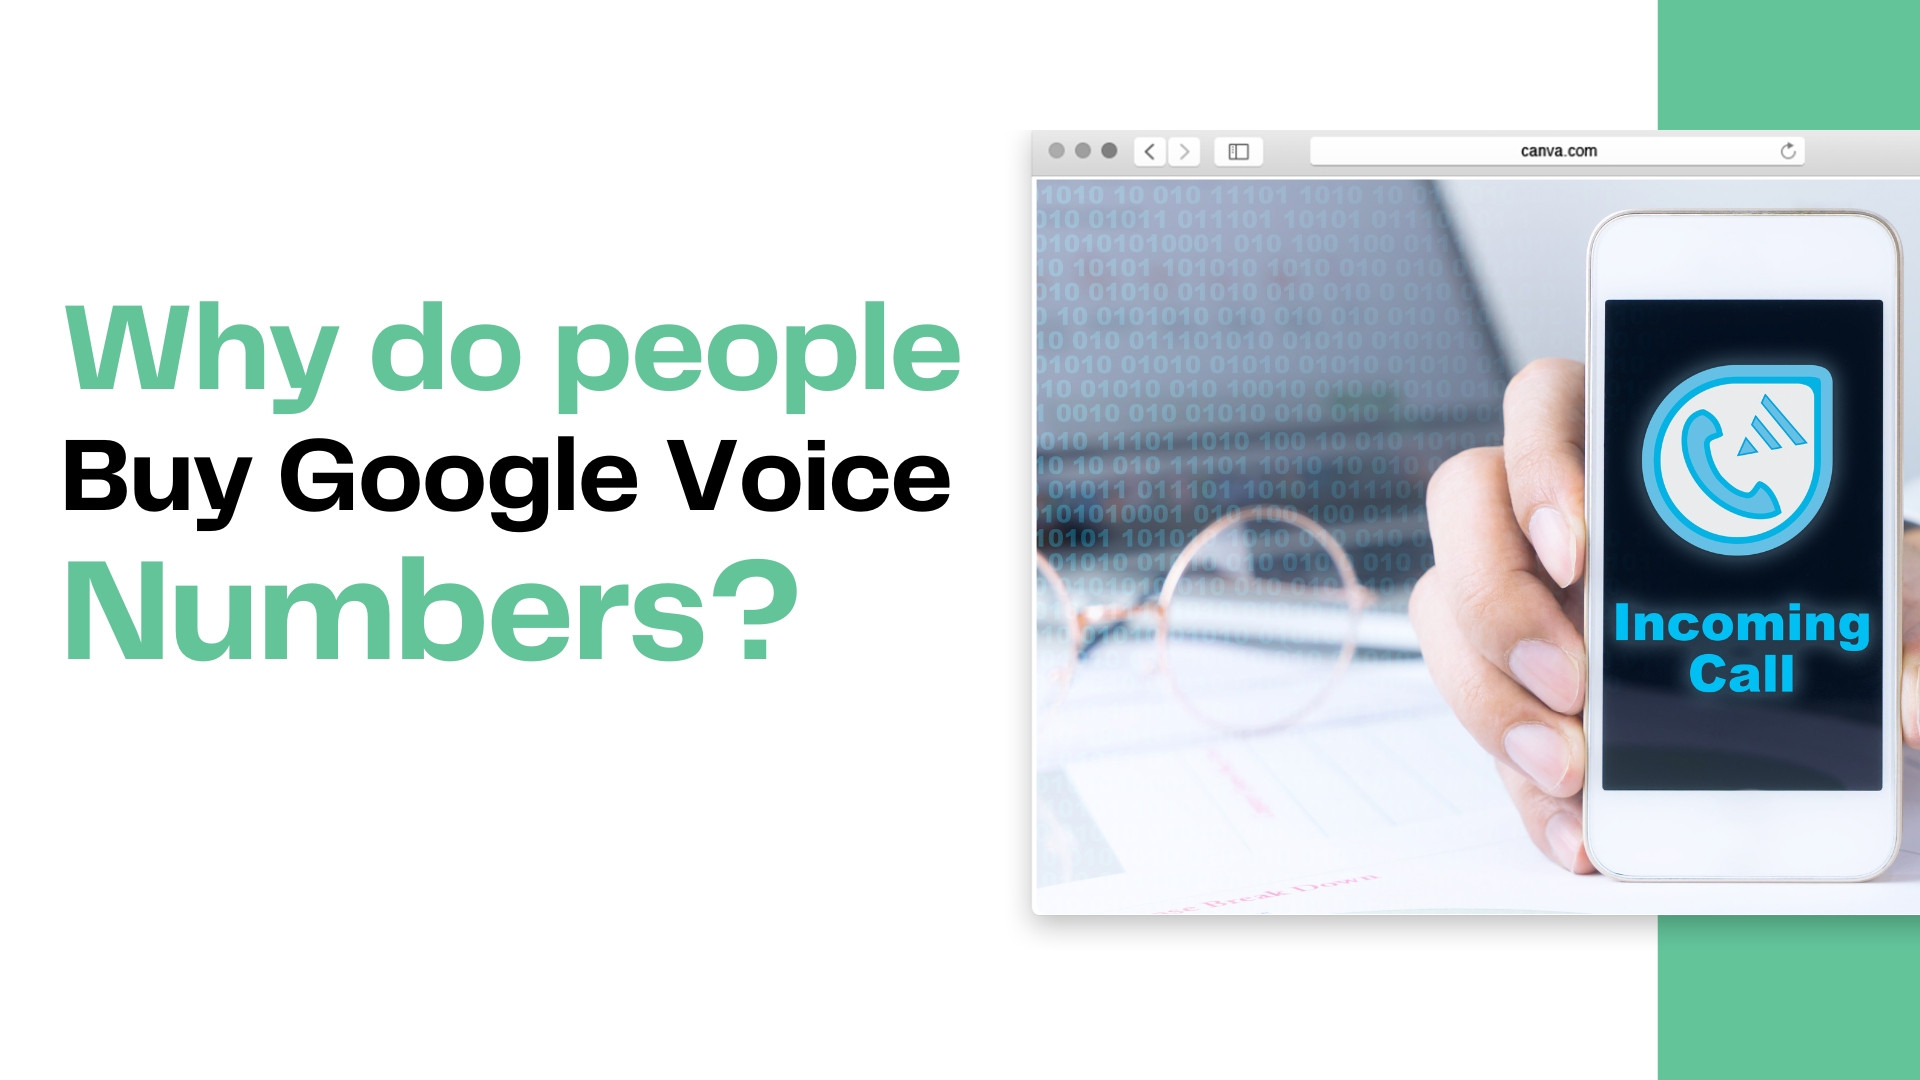 Why do people buy Google Voice numbers?